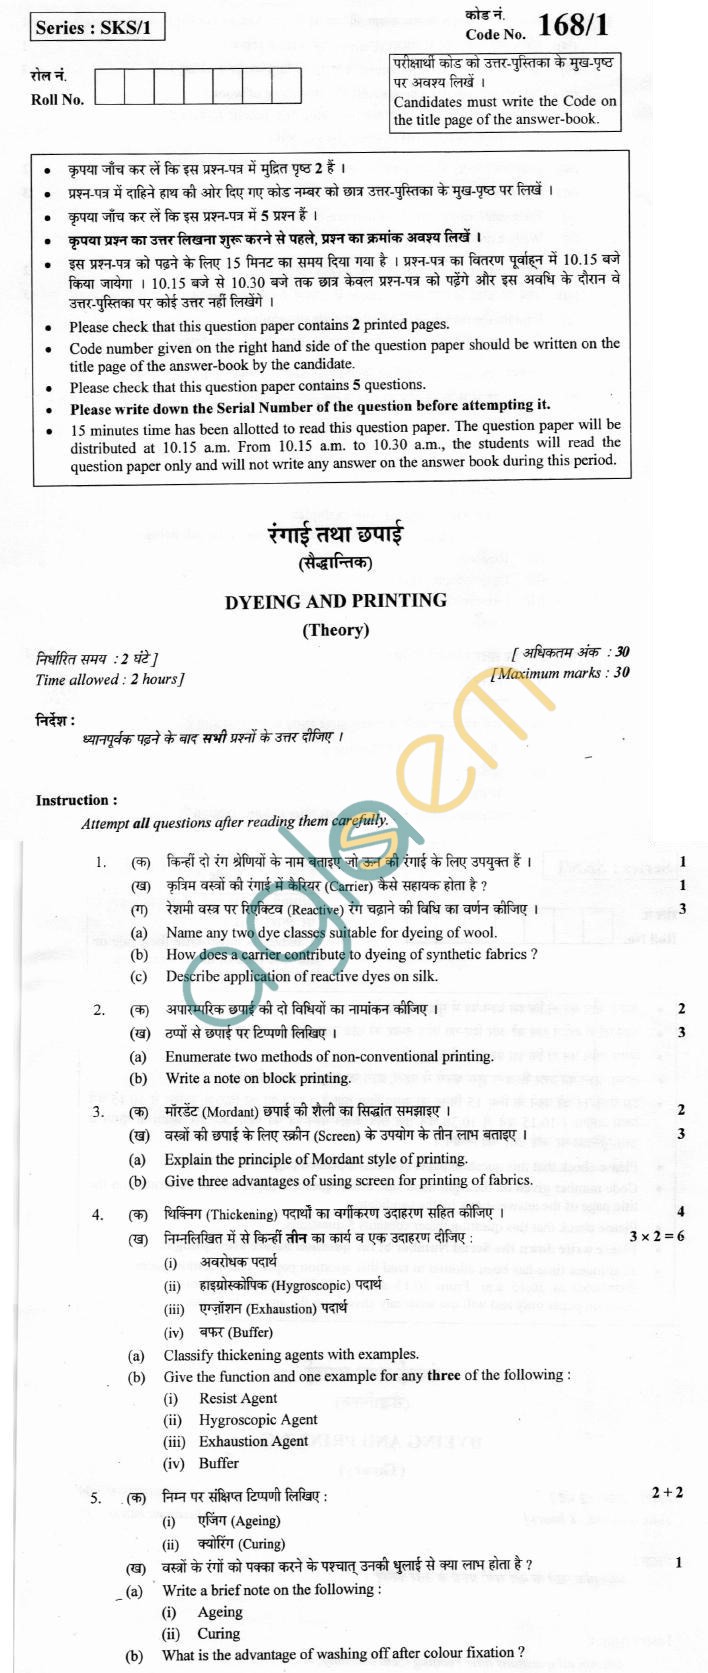 CBSE Board Exam 2013 Class XII Question Paper - Dyeing and Printing